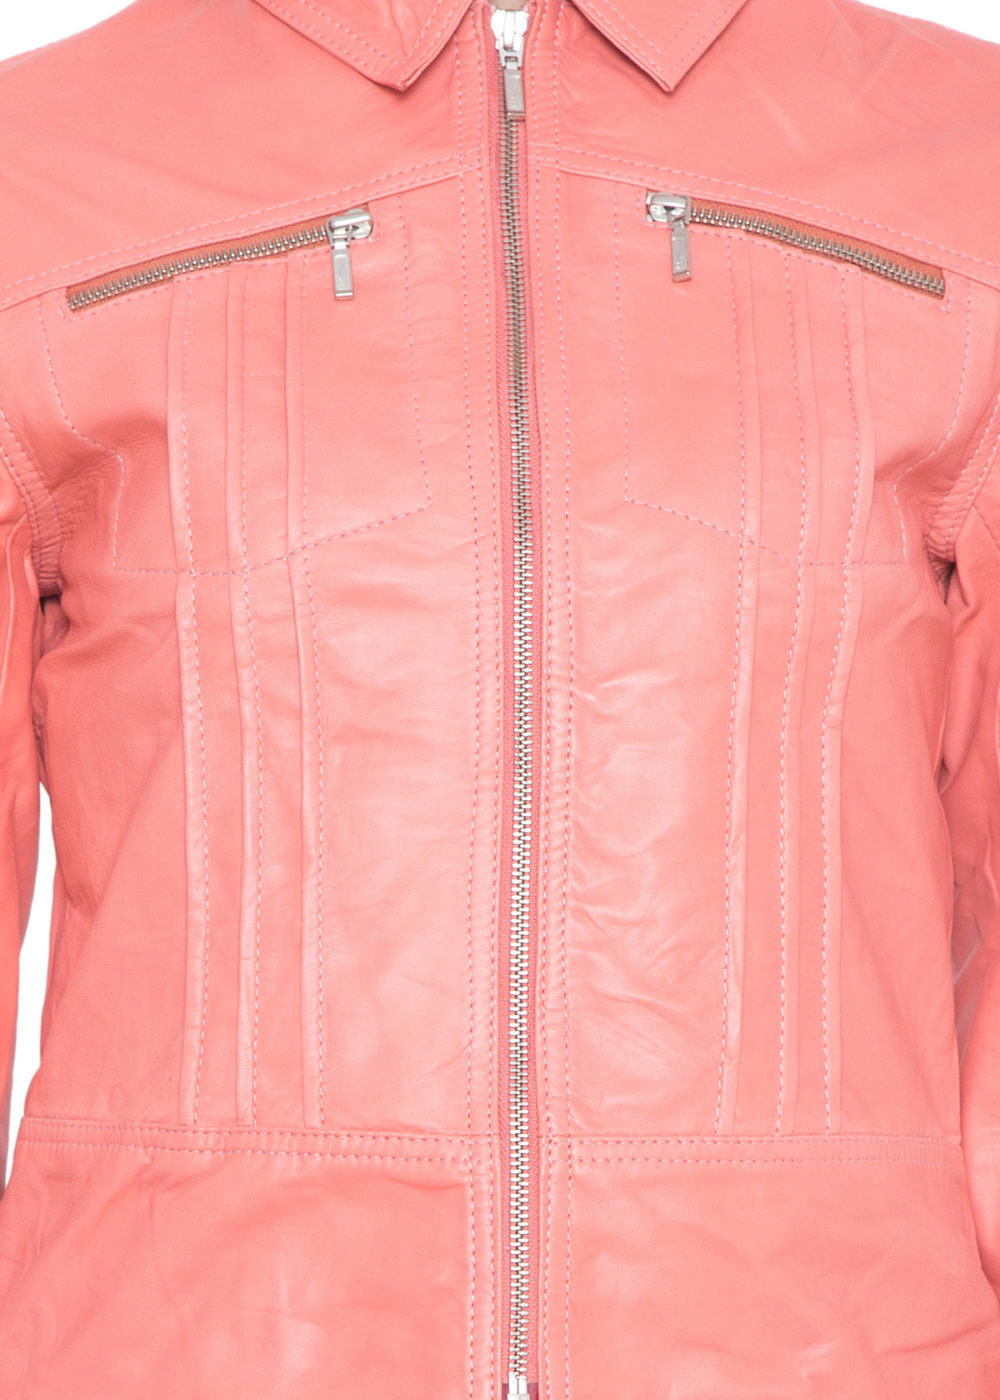 PINK CORAL FULL LEATHER JACKET-WOMEN